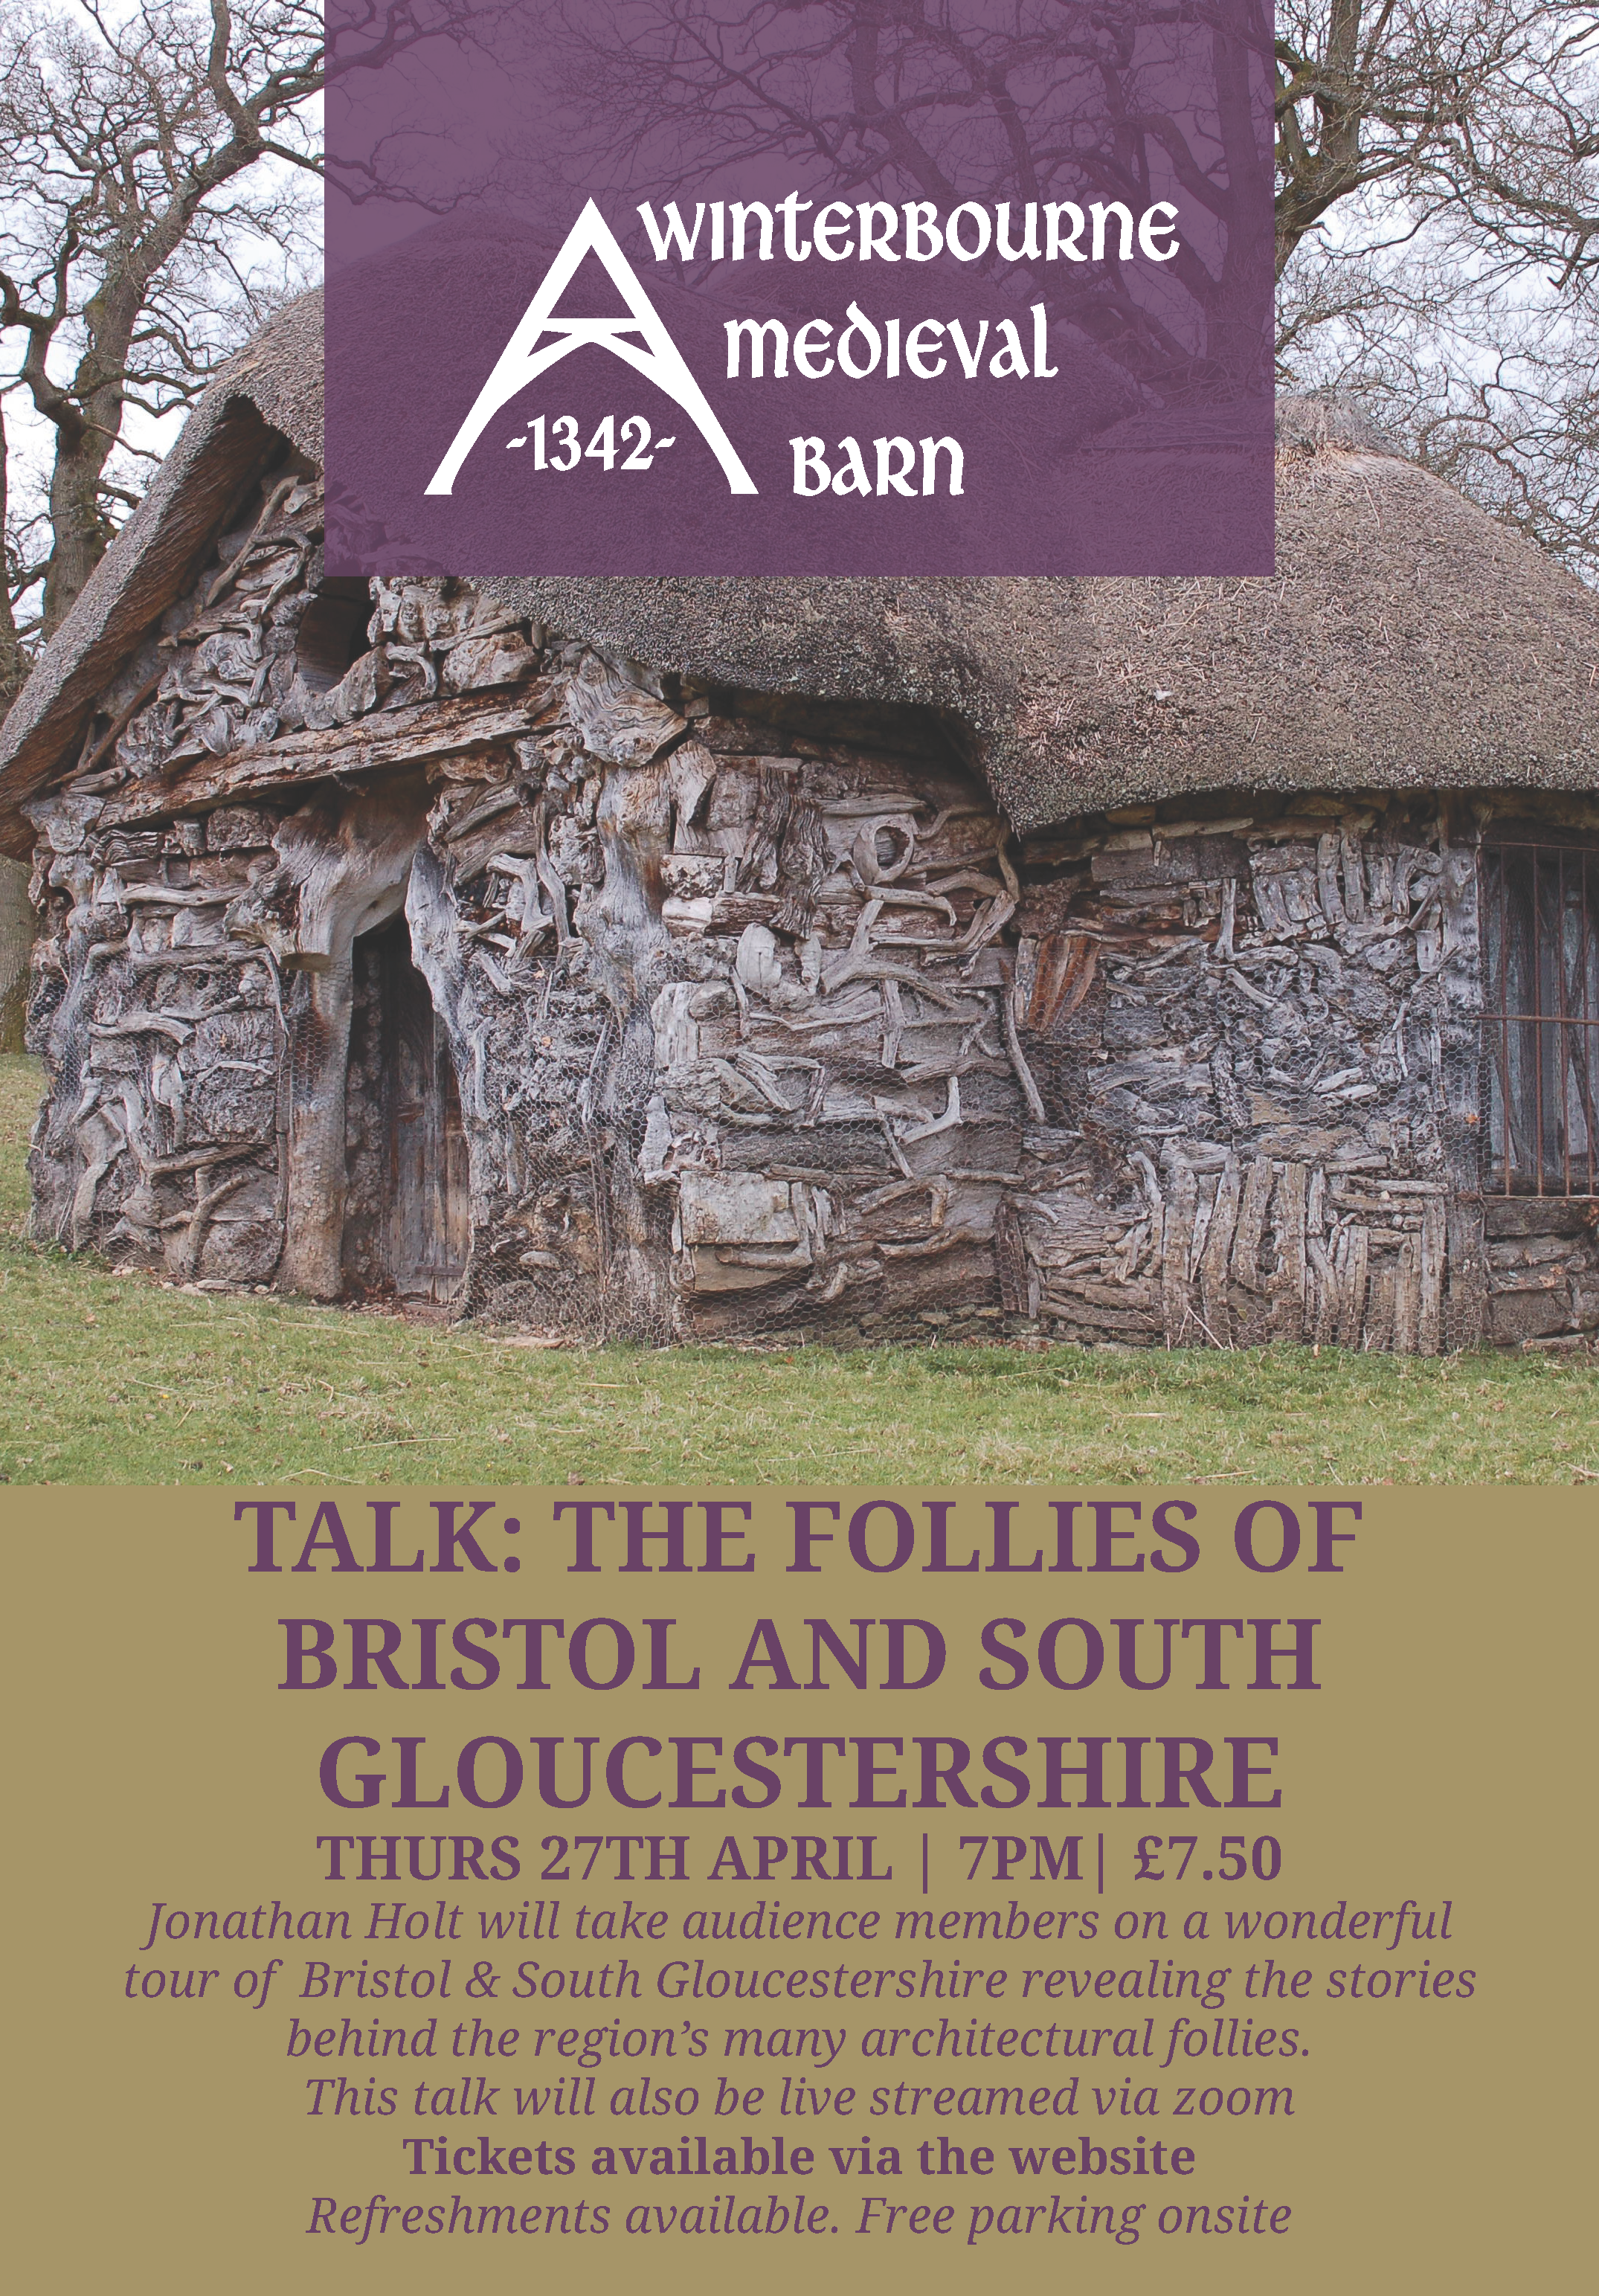 Winterbourne Medieval Barn. TALK: THE FOLLIES OF BRISTOL AND SOUTH GLOUCESTERSHIRE THURS 27TH APRIL | 7PM| £7.50 Jonathan Holt will take audience members on a wonderful tour of Bristol & South Gloucestershire revealing the stories behind the region’s many architectural follies. This talk will also be live streamed via zoom Tickets available via the website Refreshments available. Free parking onsite.